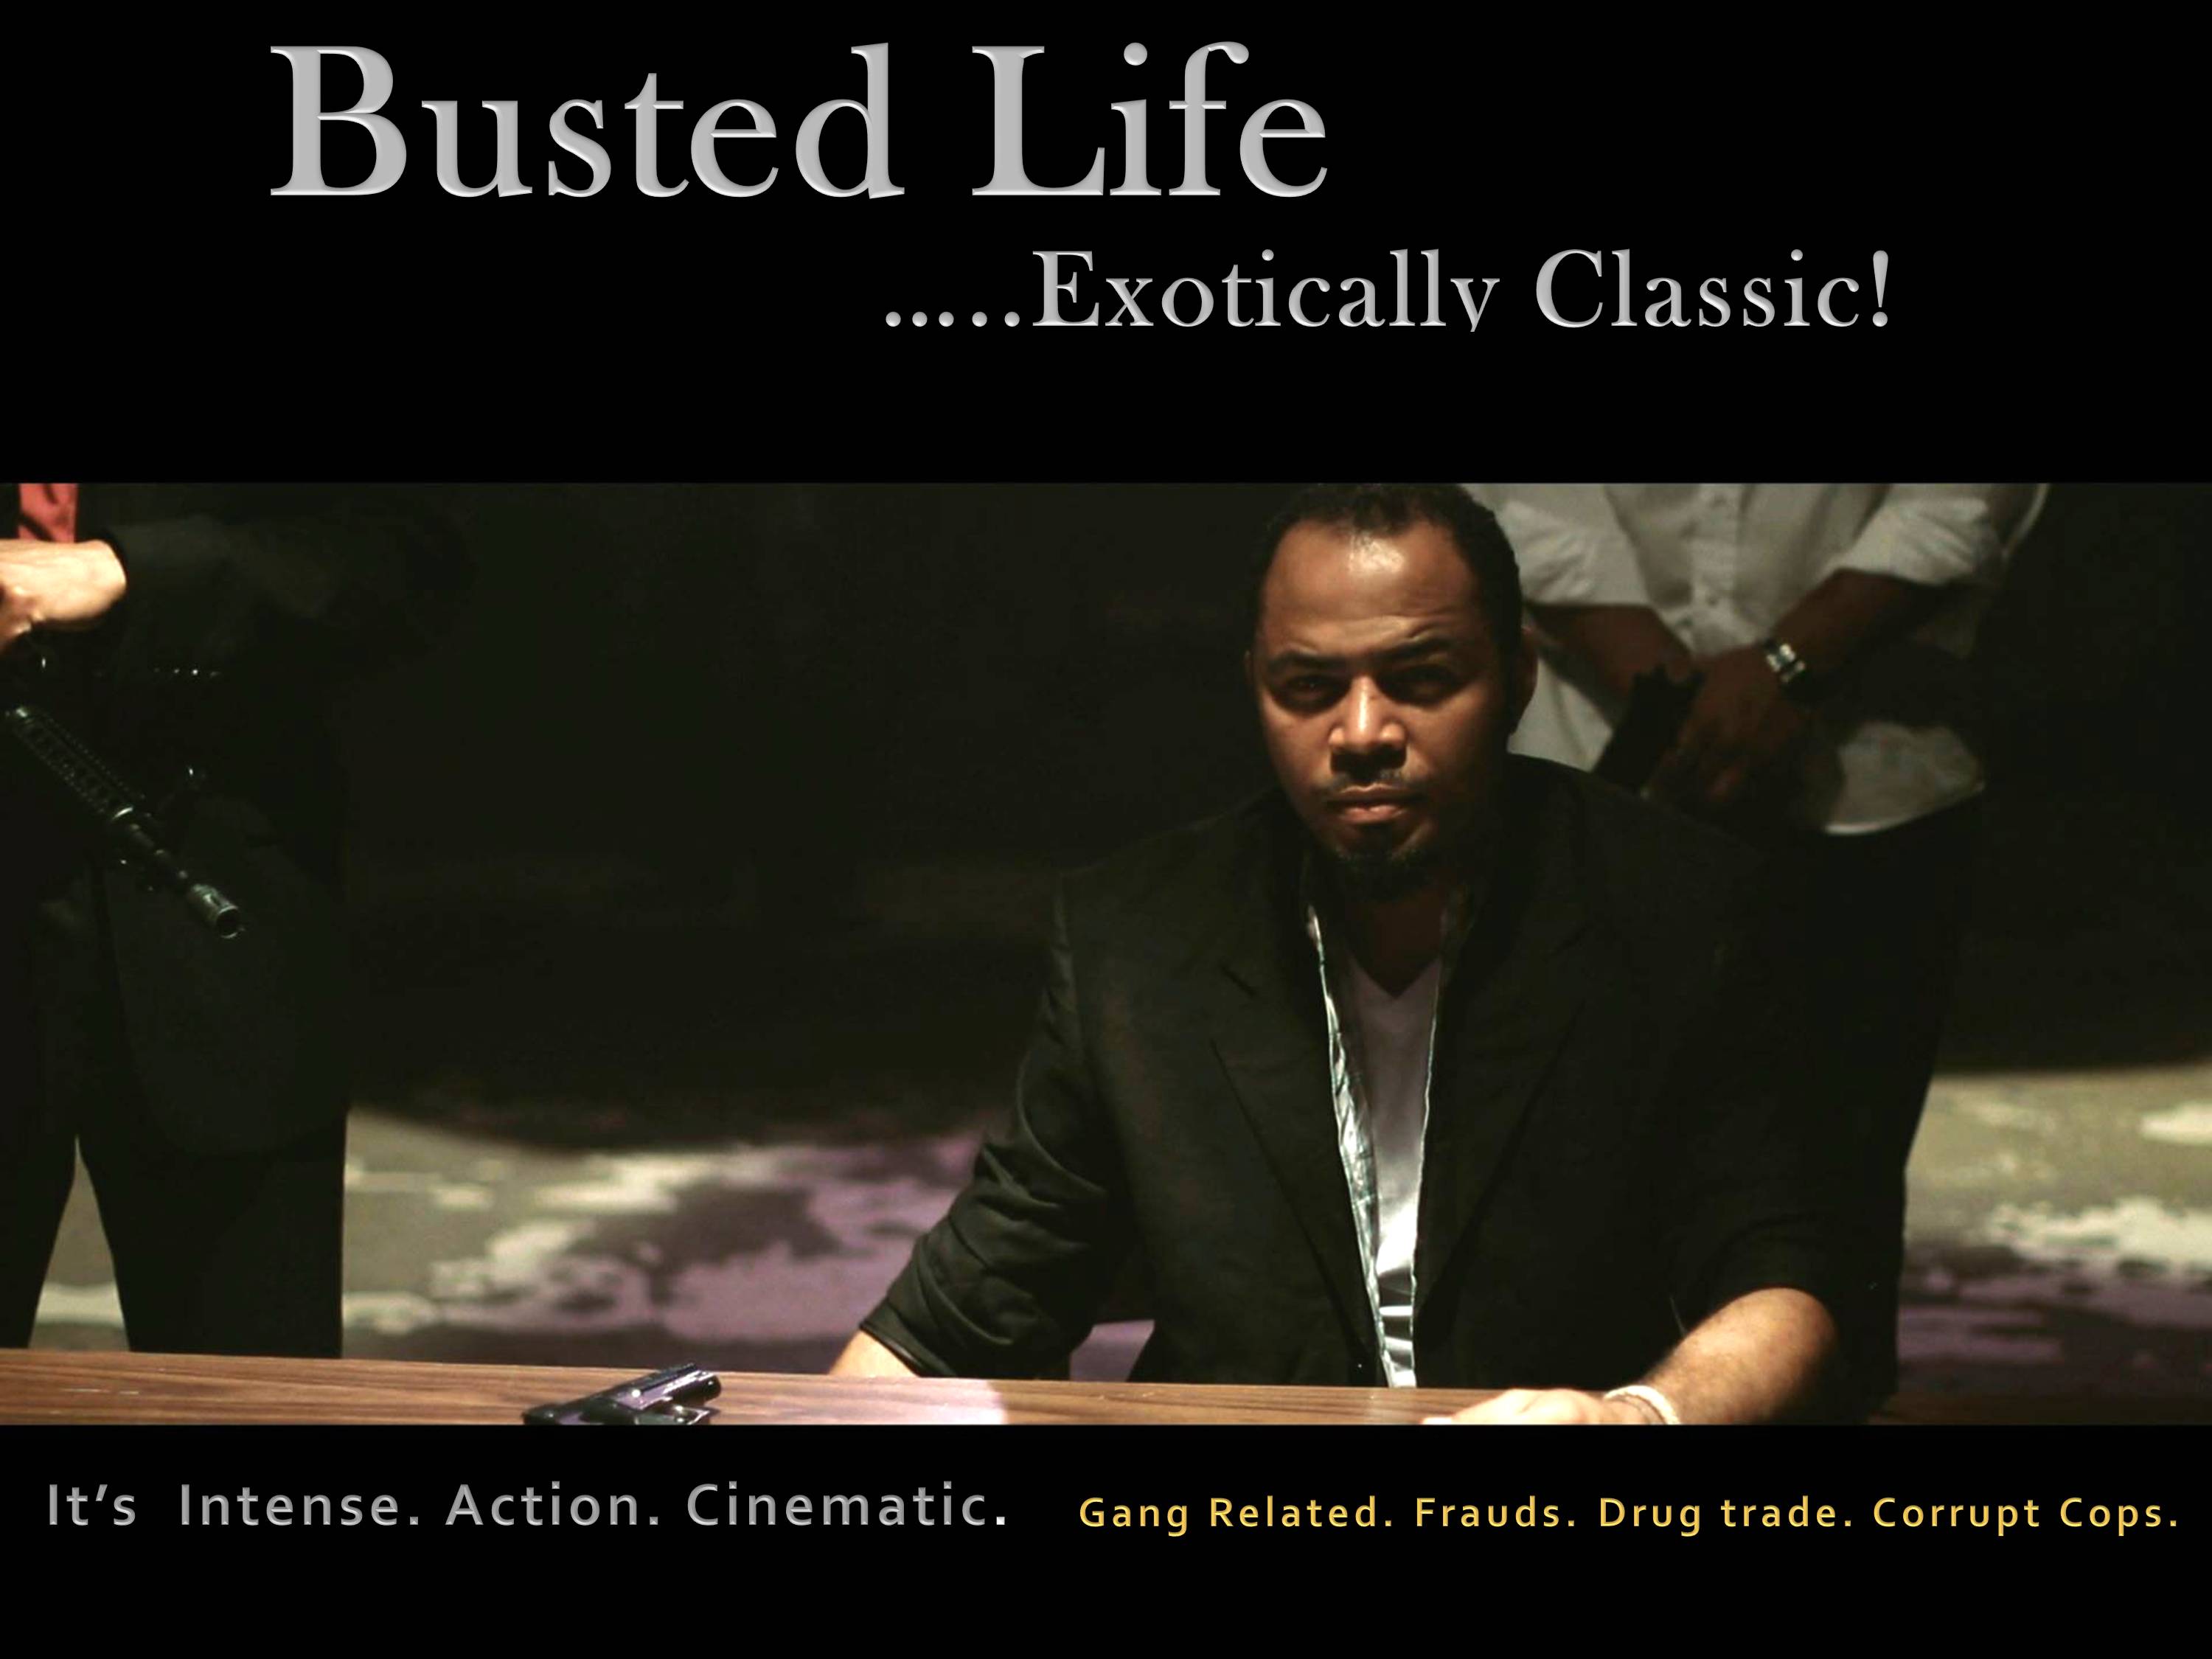 BUSTED LIFE DESIGNS Gang Related Drug trade Corrupt Cops